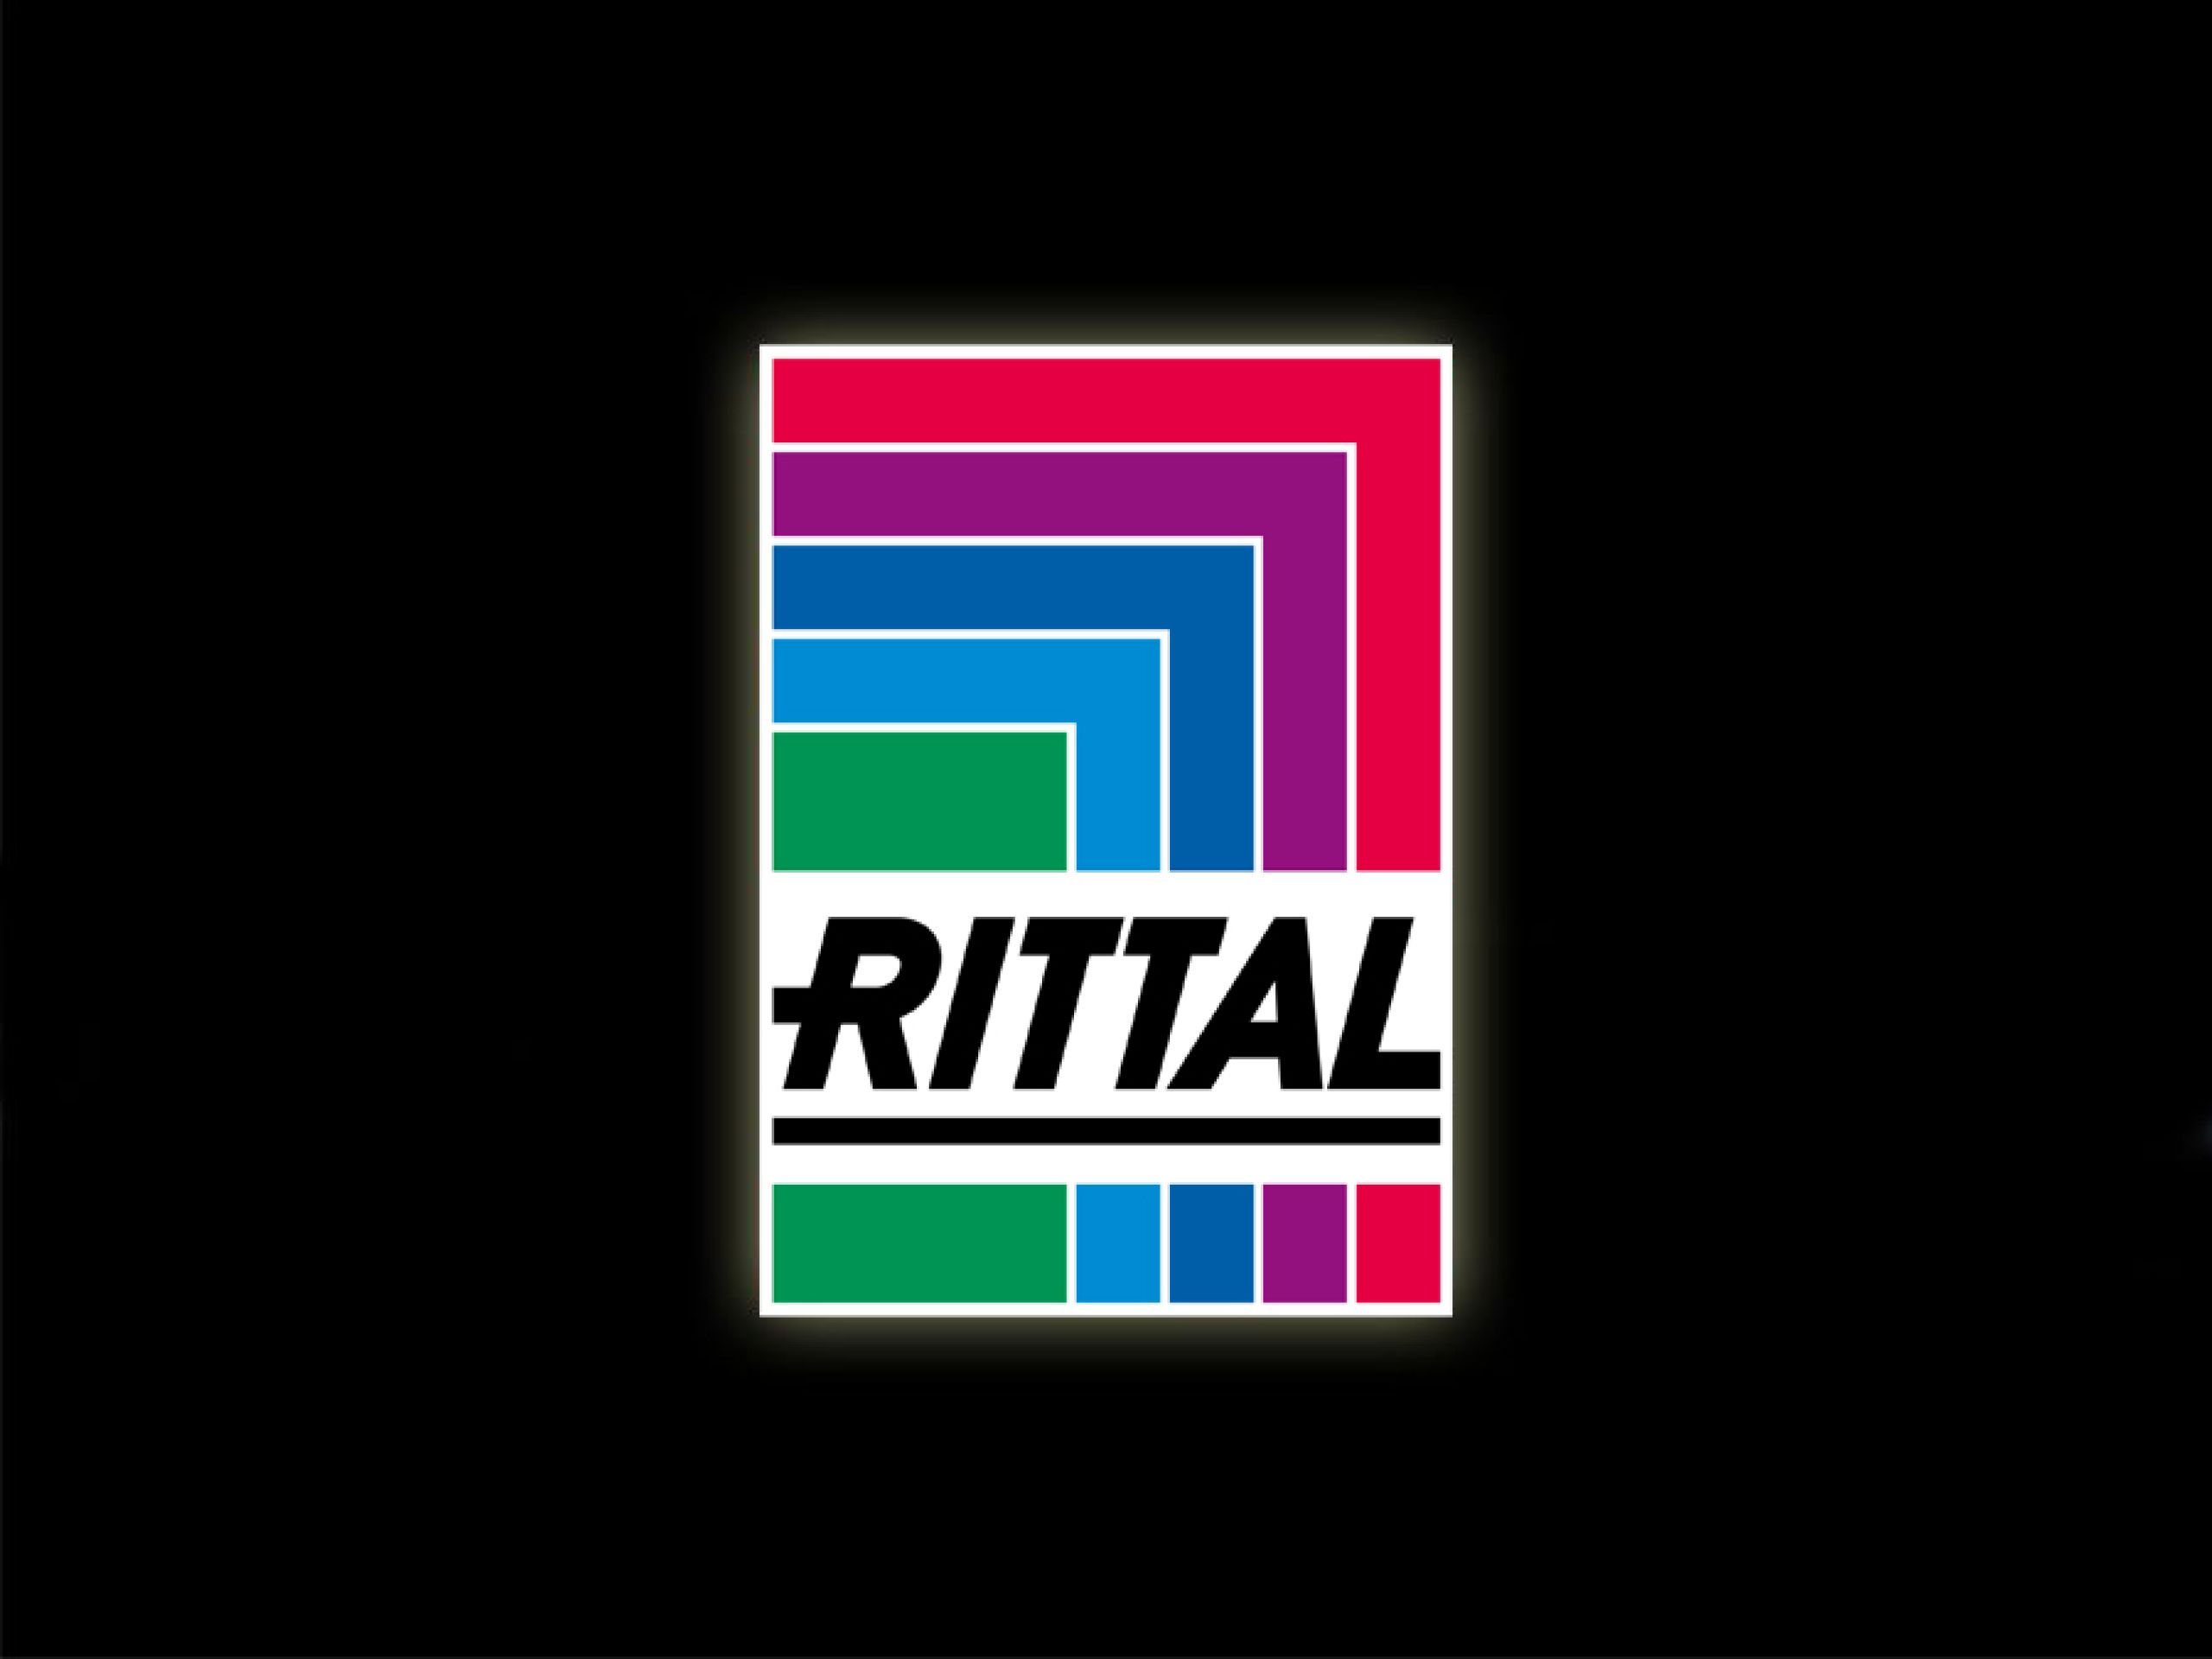 Rittal North America LLC Power distribution, control, IT infrastructure, Software & services,